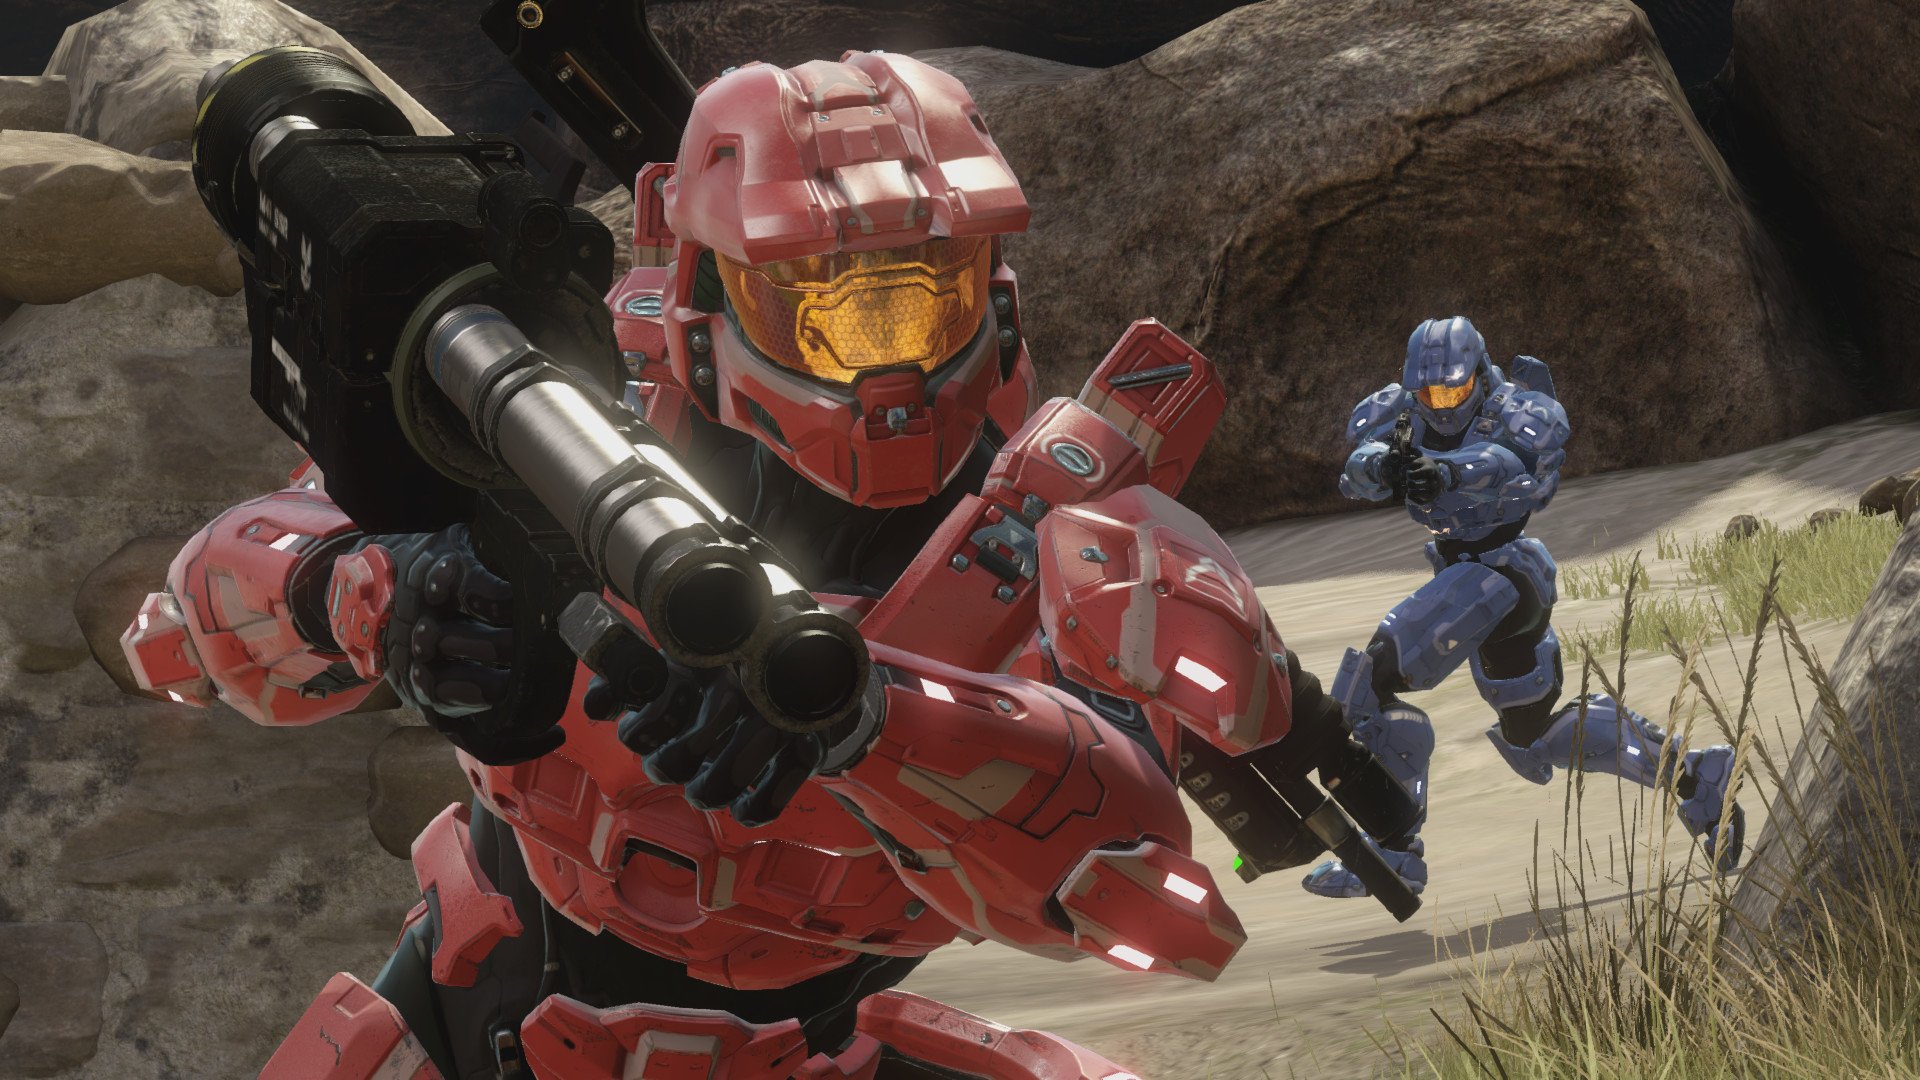 Halo: The Master Chief Collection finally gets Steam Deck support